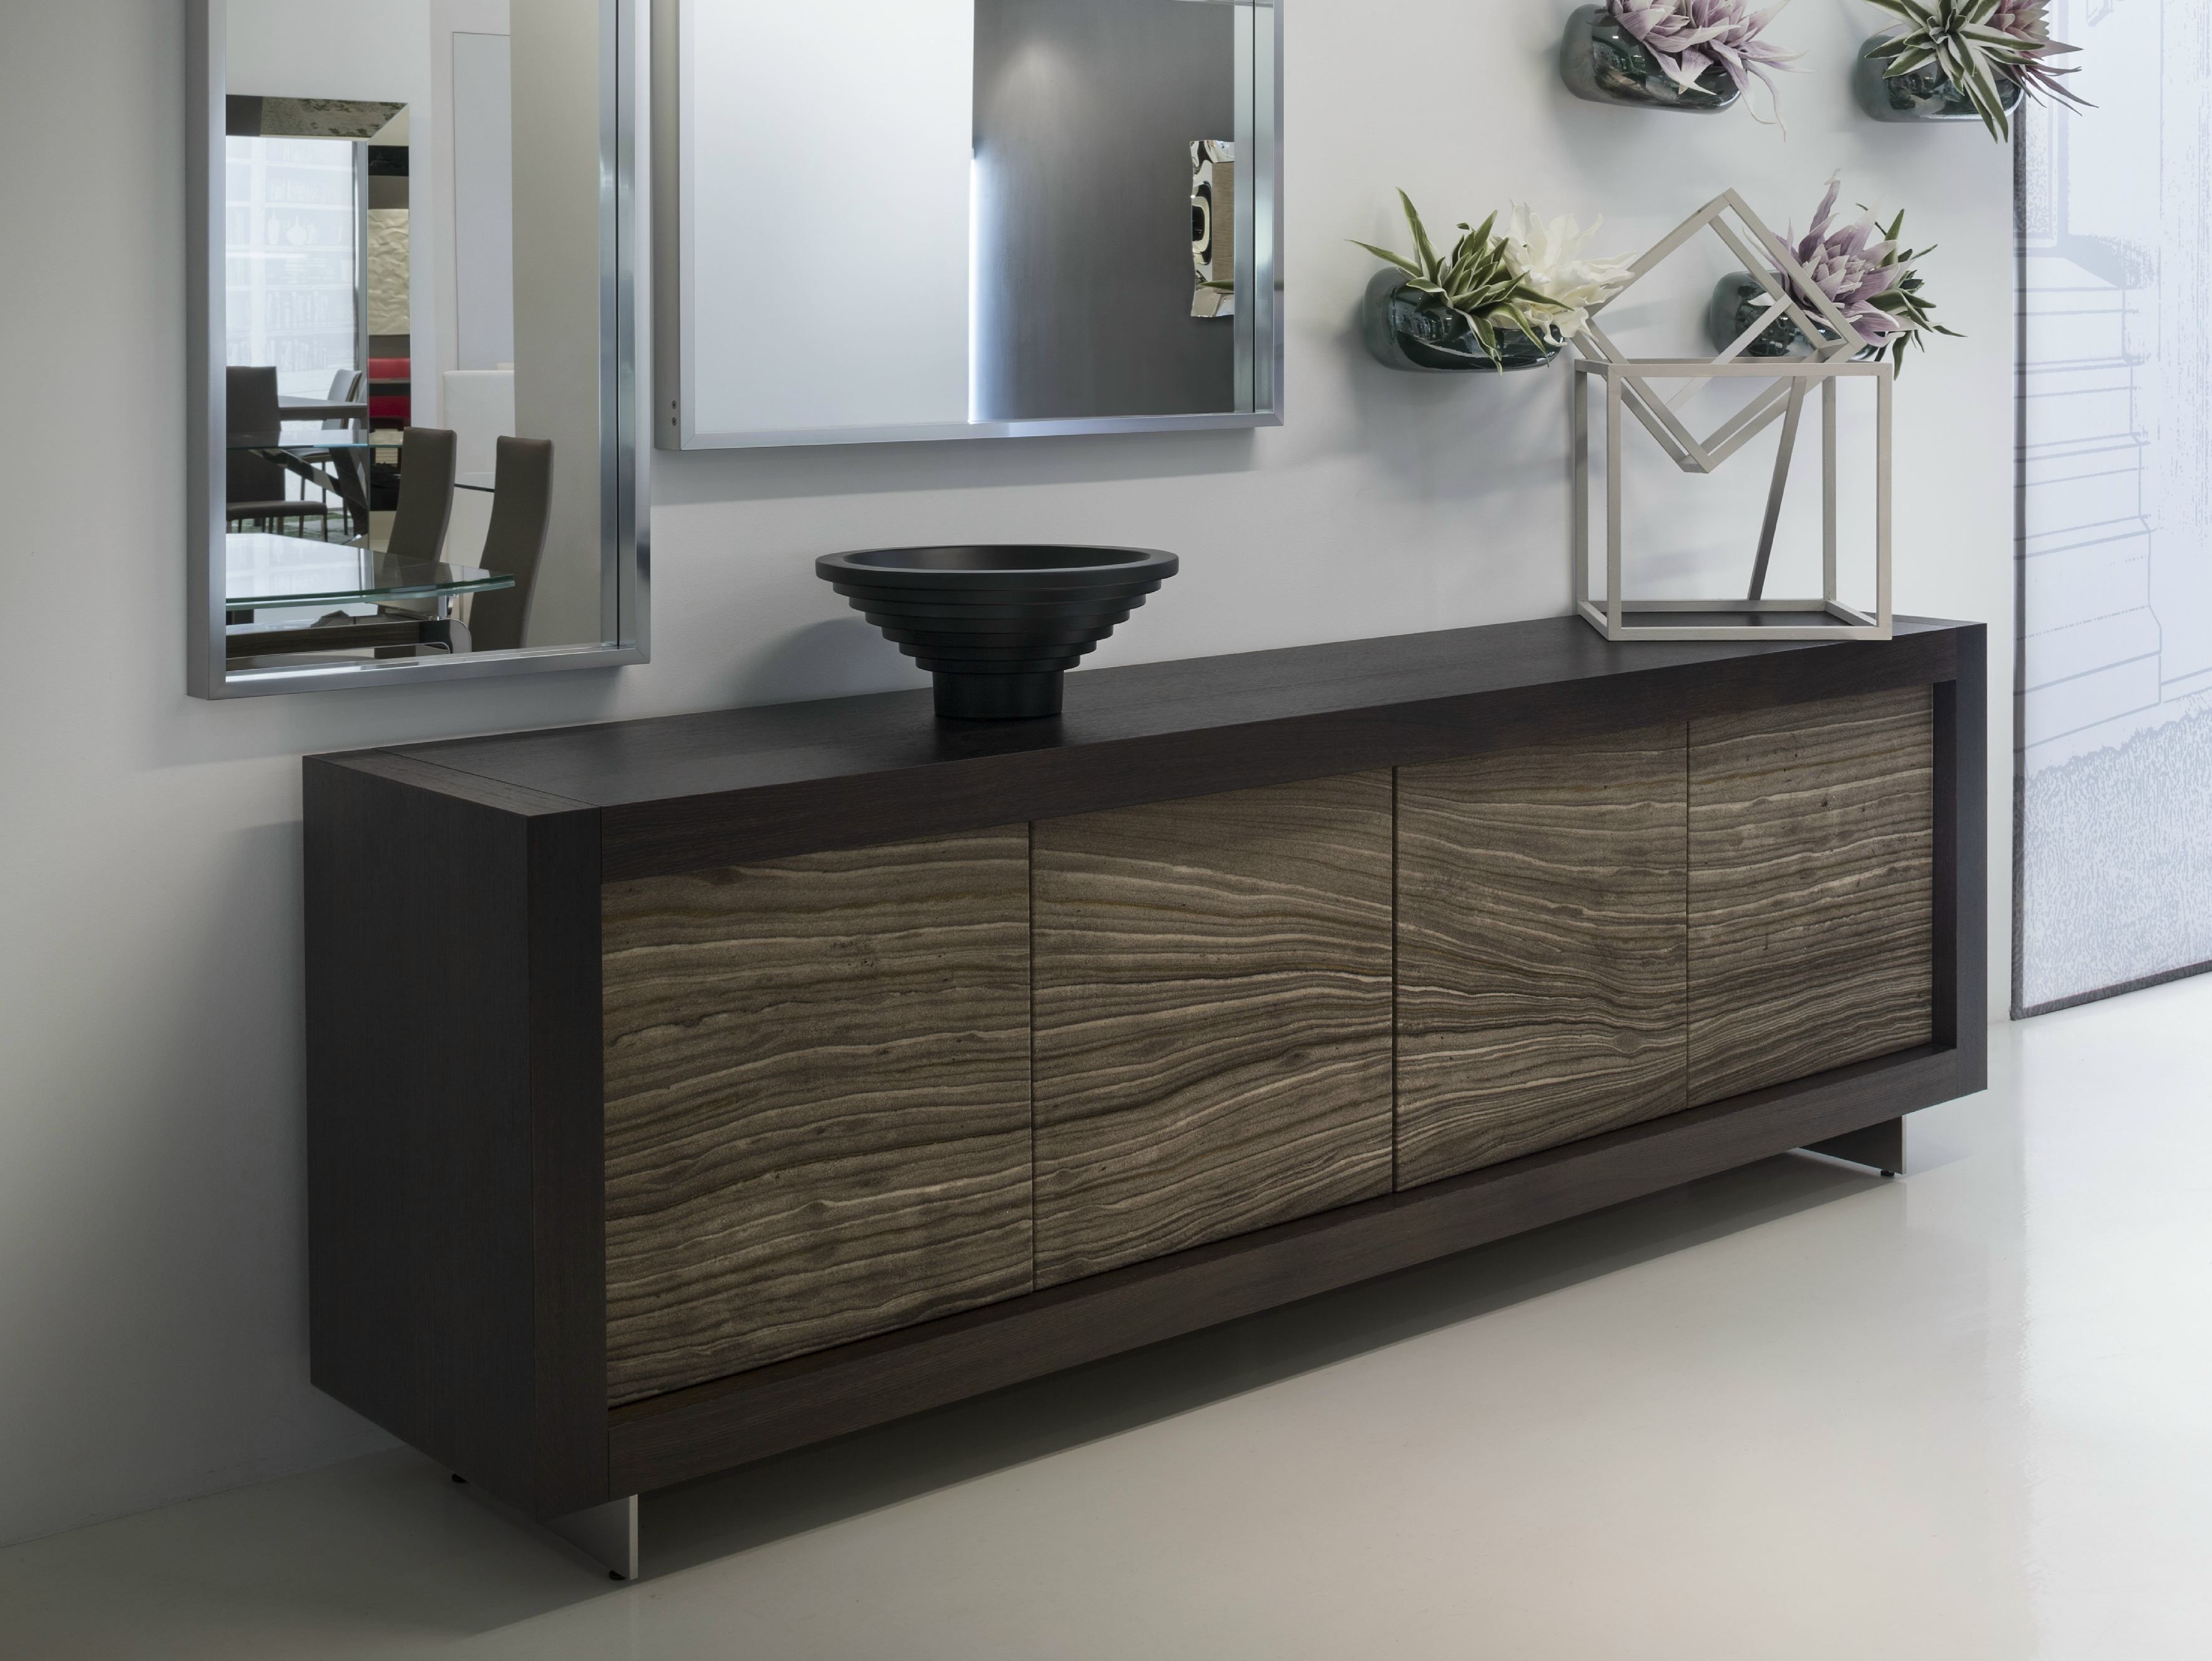 Sideboard With Doors Picasso Stone Doorriflessi Design Riflessi Throughout Latest Rani 4 Door Sideboards (View 14 of 20)